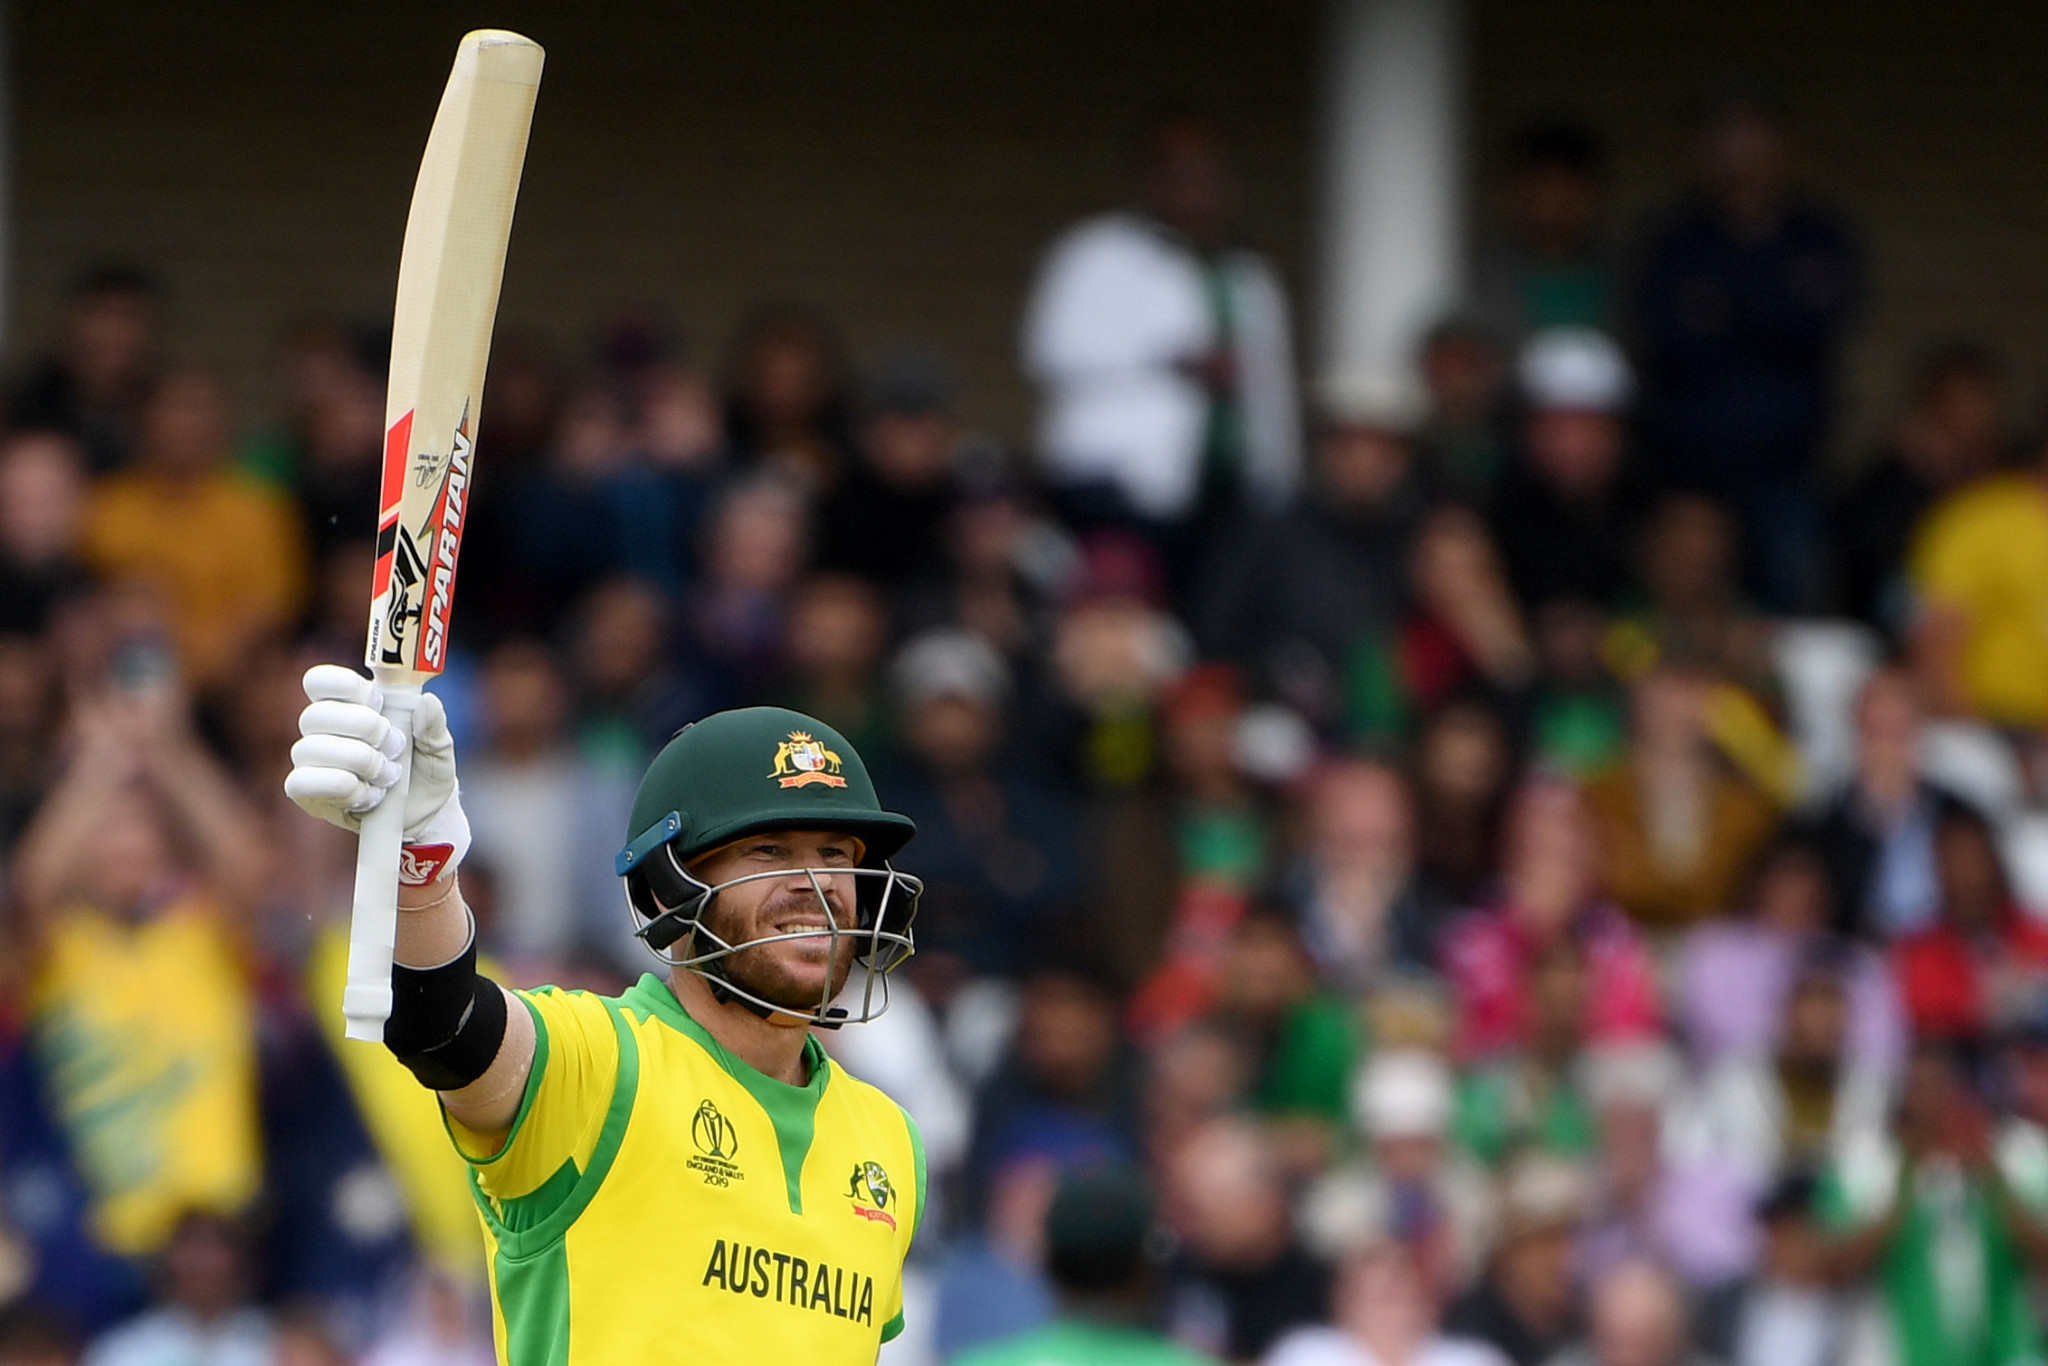 David Warner’s innings of 166 helped Australia to a 48-run win over Bangladesh at the ICC Men's World Cup today ©Getty Images